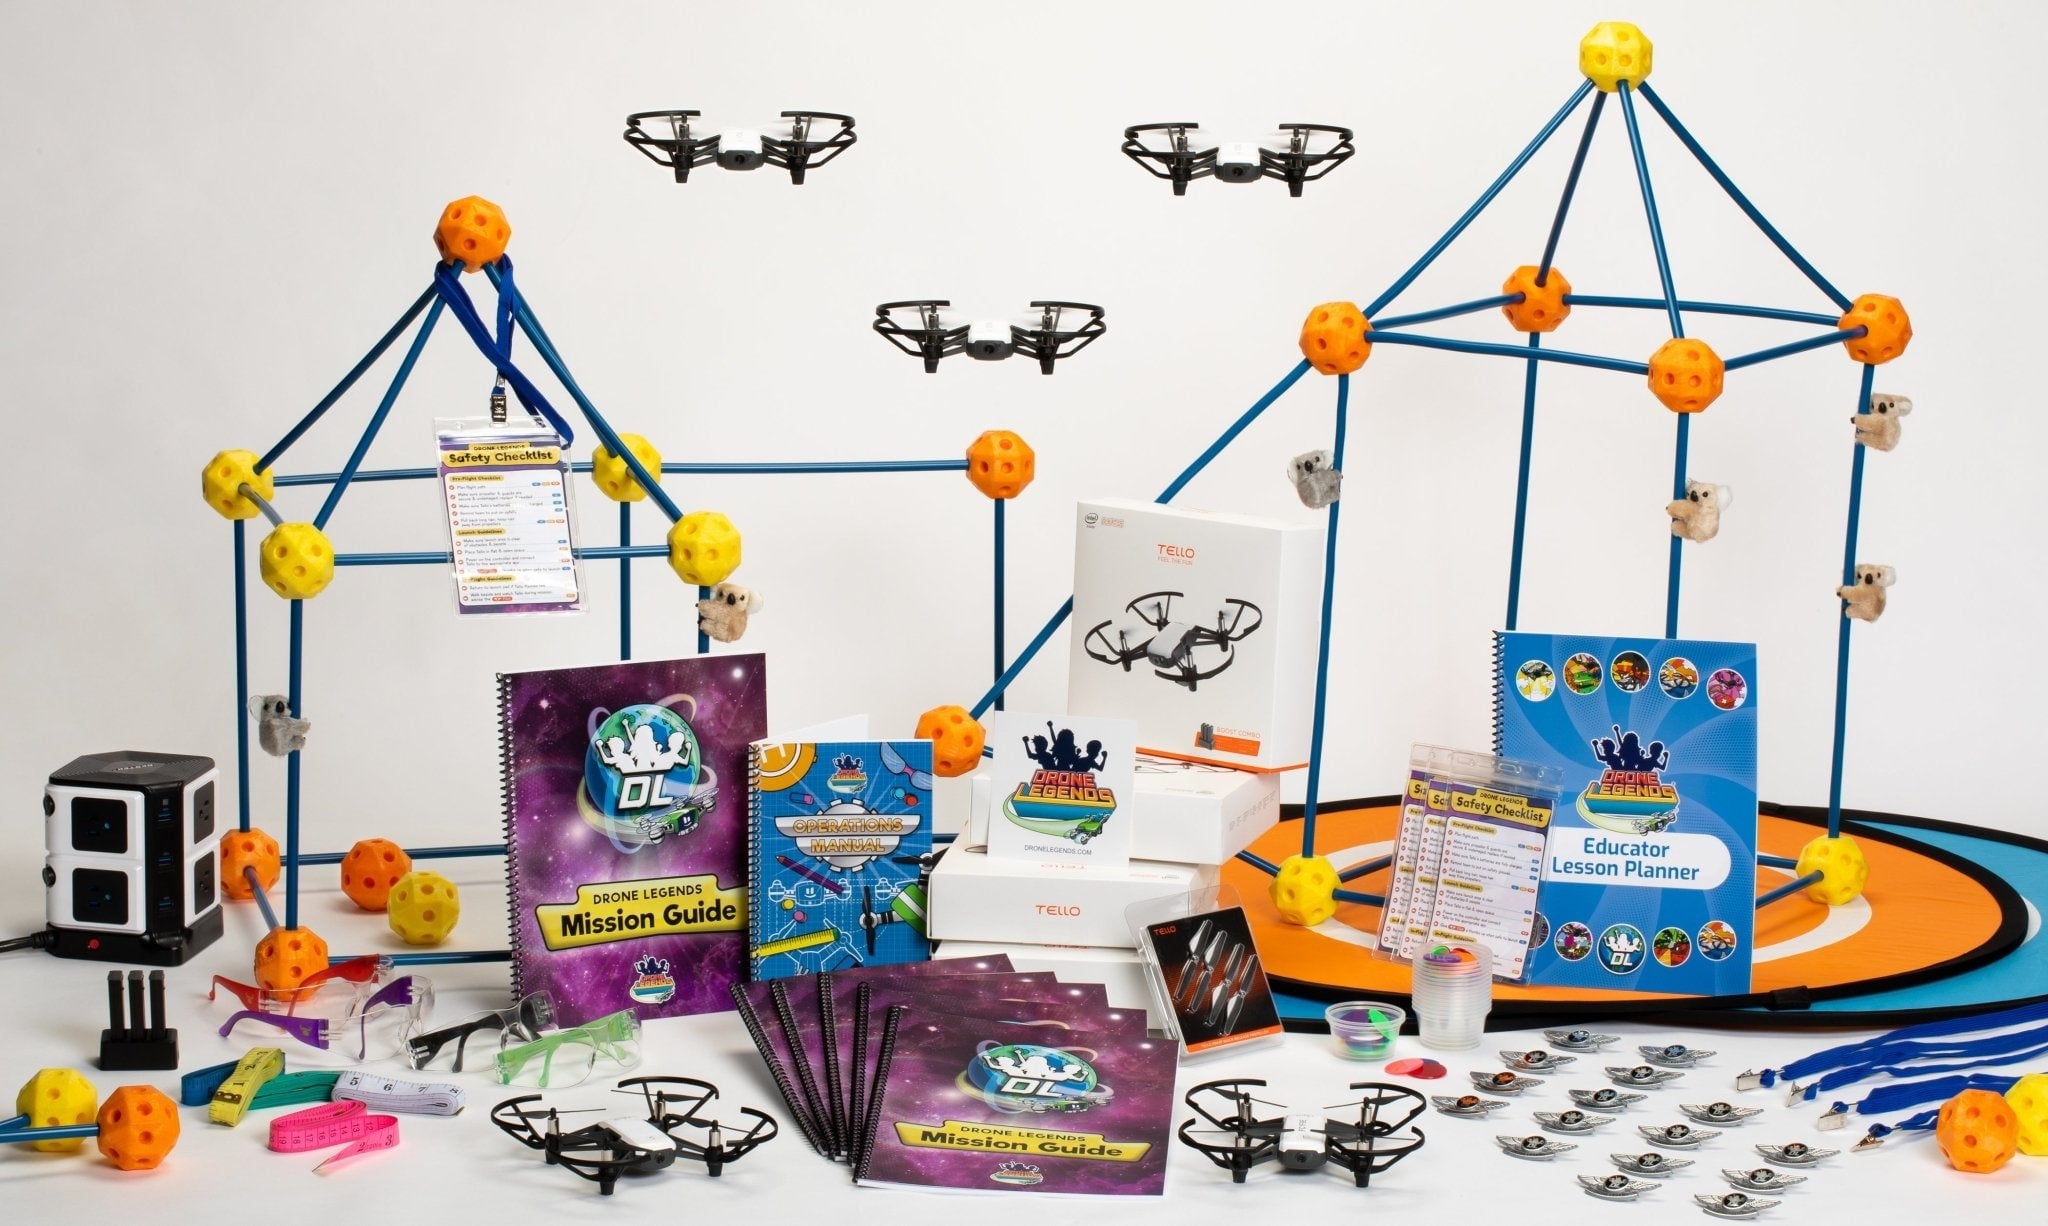 Instructor Drone Kit